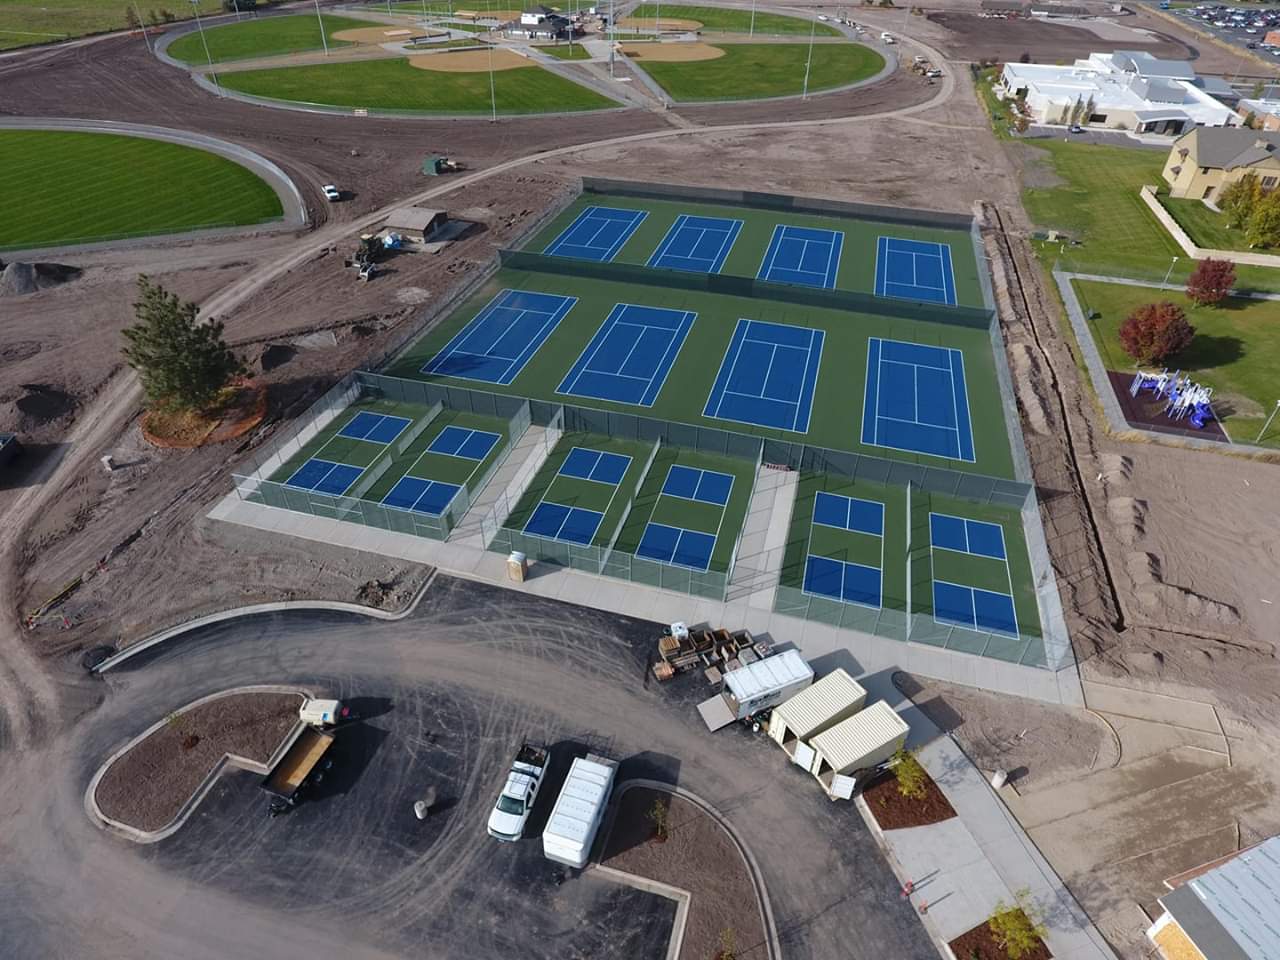 An aerial view of a brand new tennis and pickleball complex with fencing and green, blue, and white colors.